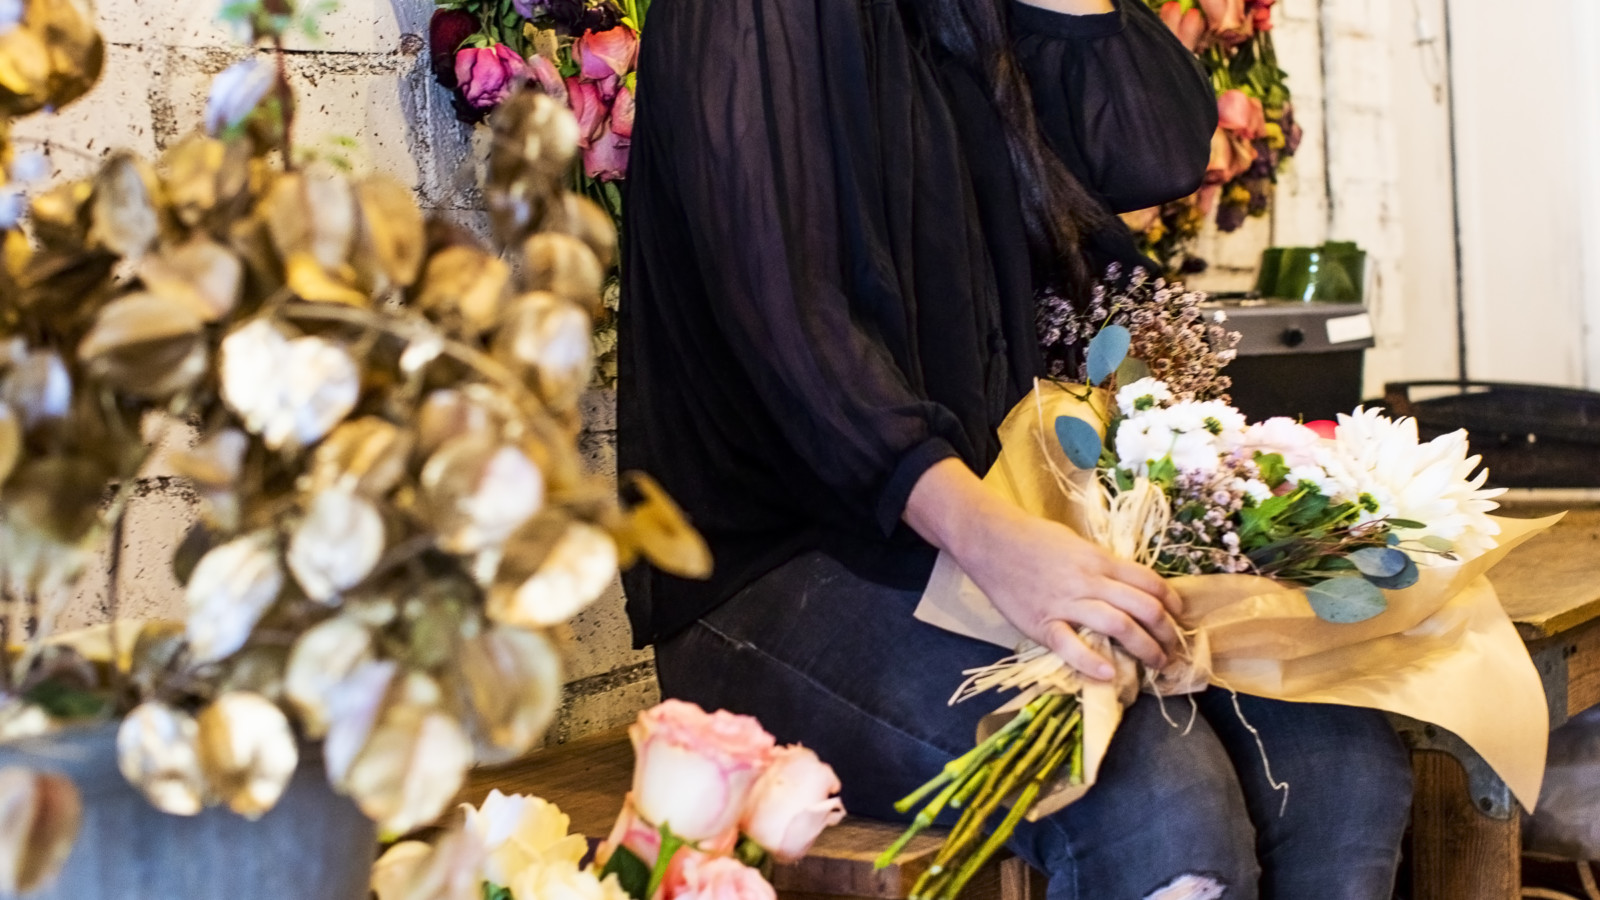 Dr. Sandra Colton-Medici sitting on bench surrounded by flowers in flower shop for Spring 2021.